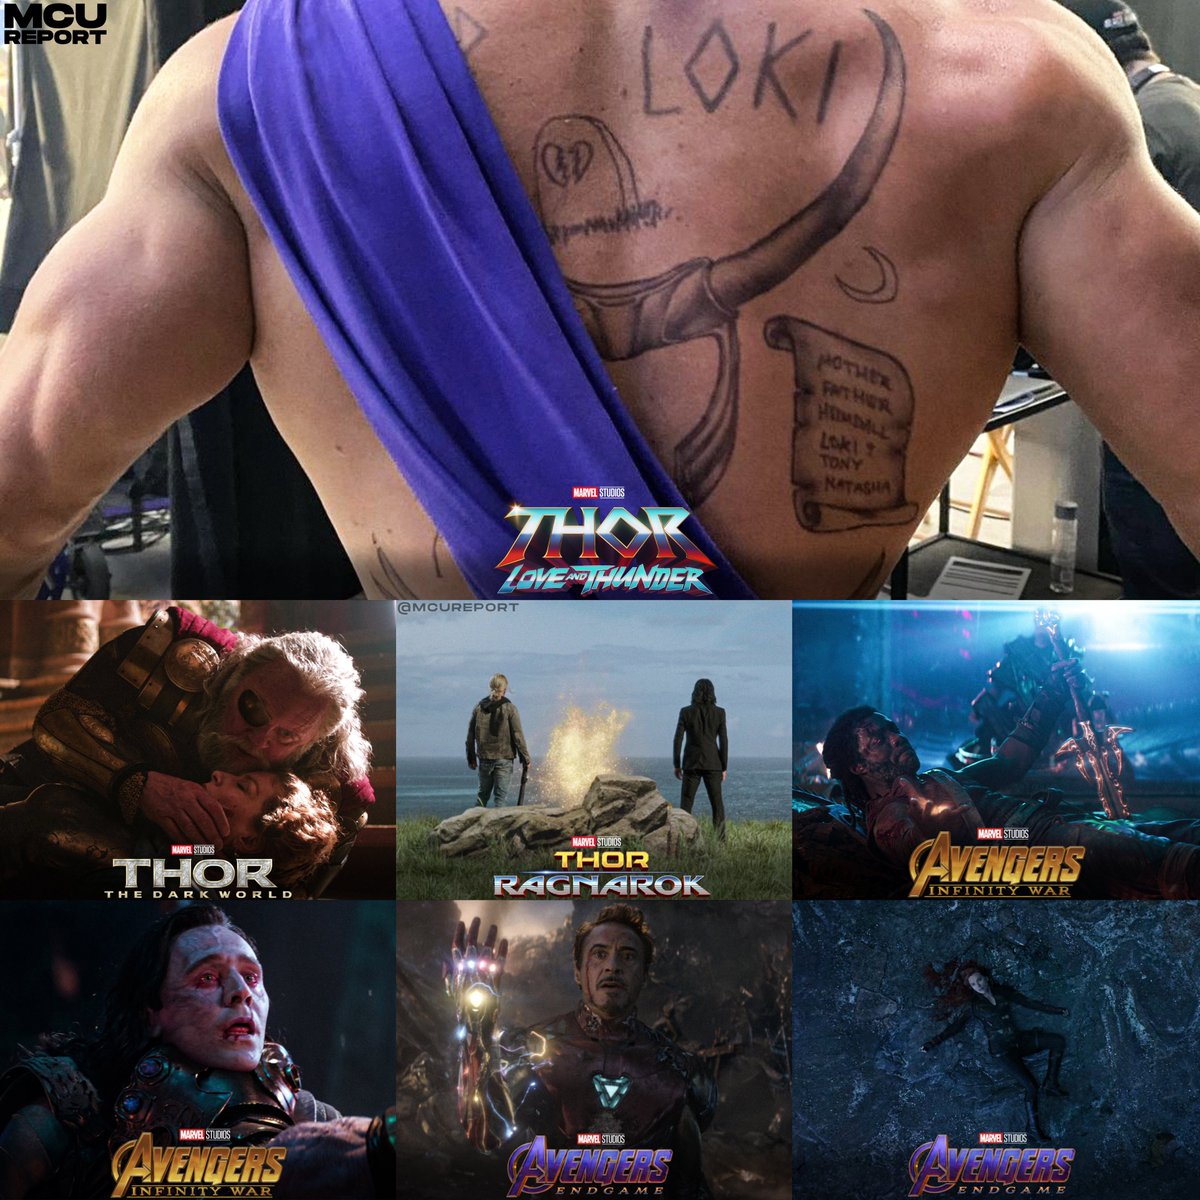 RT @MCUReport: Thor’s back tattoo with names of fallen heroes and family #ThorLoveAndThunder https://t.co/tVyx2ZKkBh